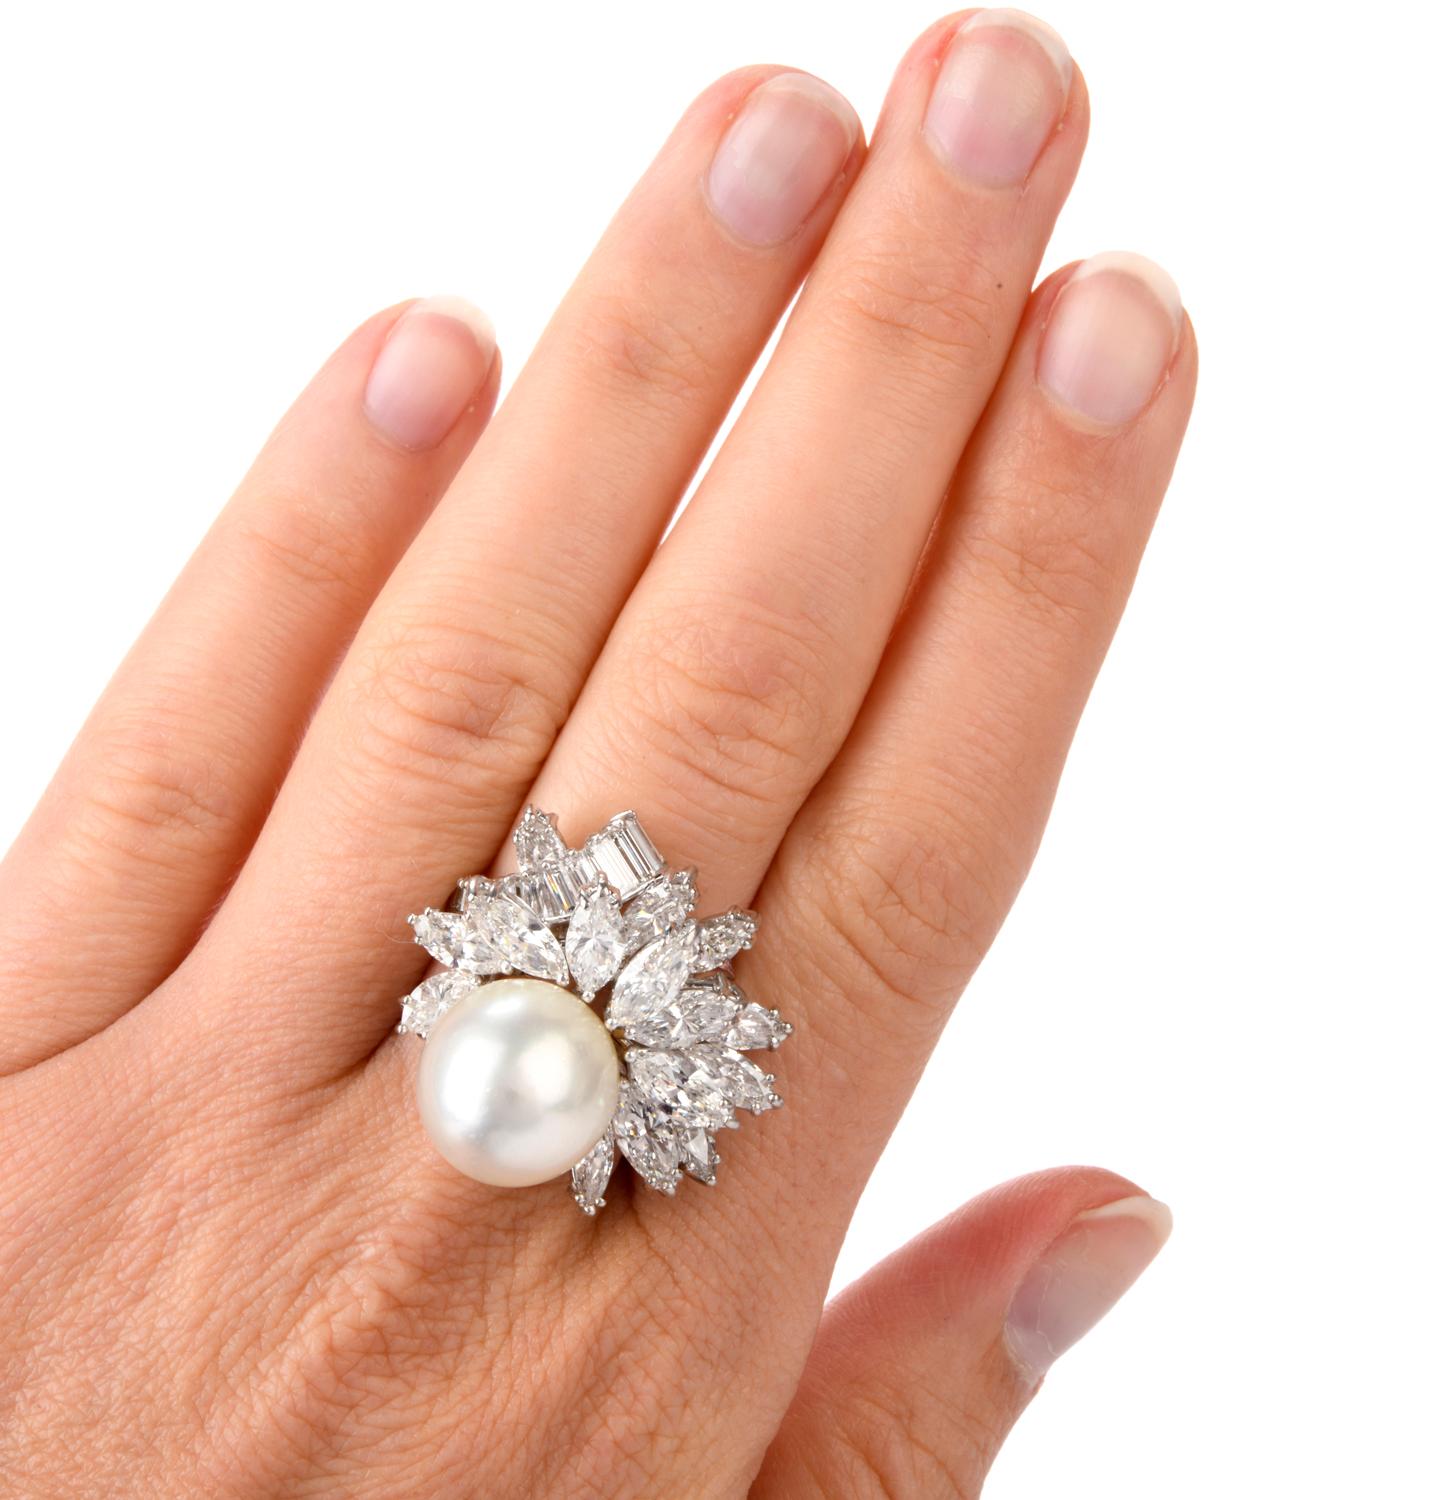 This Extraordinary Gem will Delight in White! This is the perfect compliment to 'The Little Black Dress'.

Front and center is a beautiful soft white 13.5mm Pearl with heightened luster.  Wrapping around the end of the Pearl are 15 beautifully